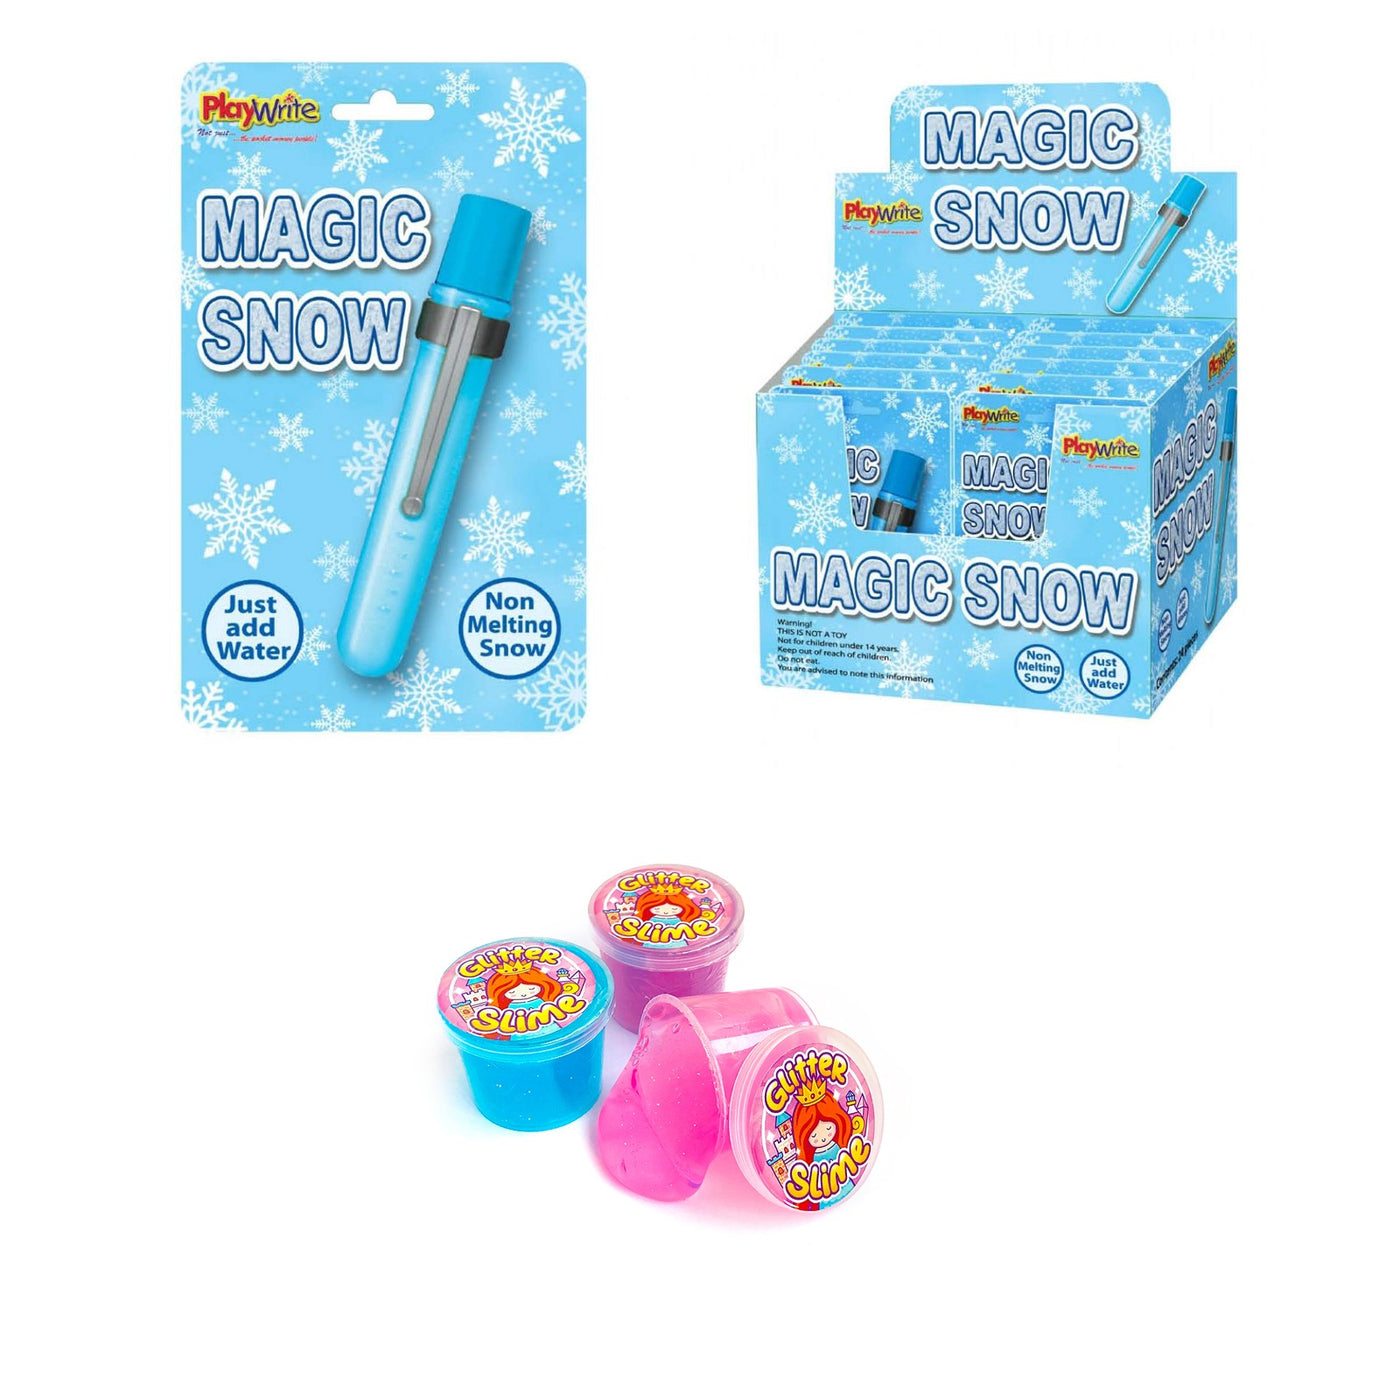 Blue Snowflake Winter Princess Castle Birthday, Christmas Party Favours For Girls.